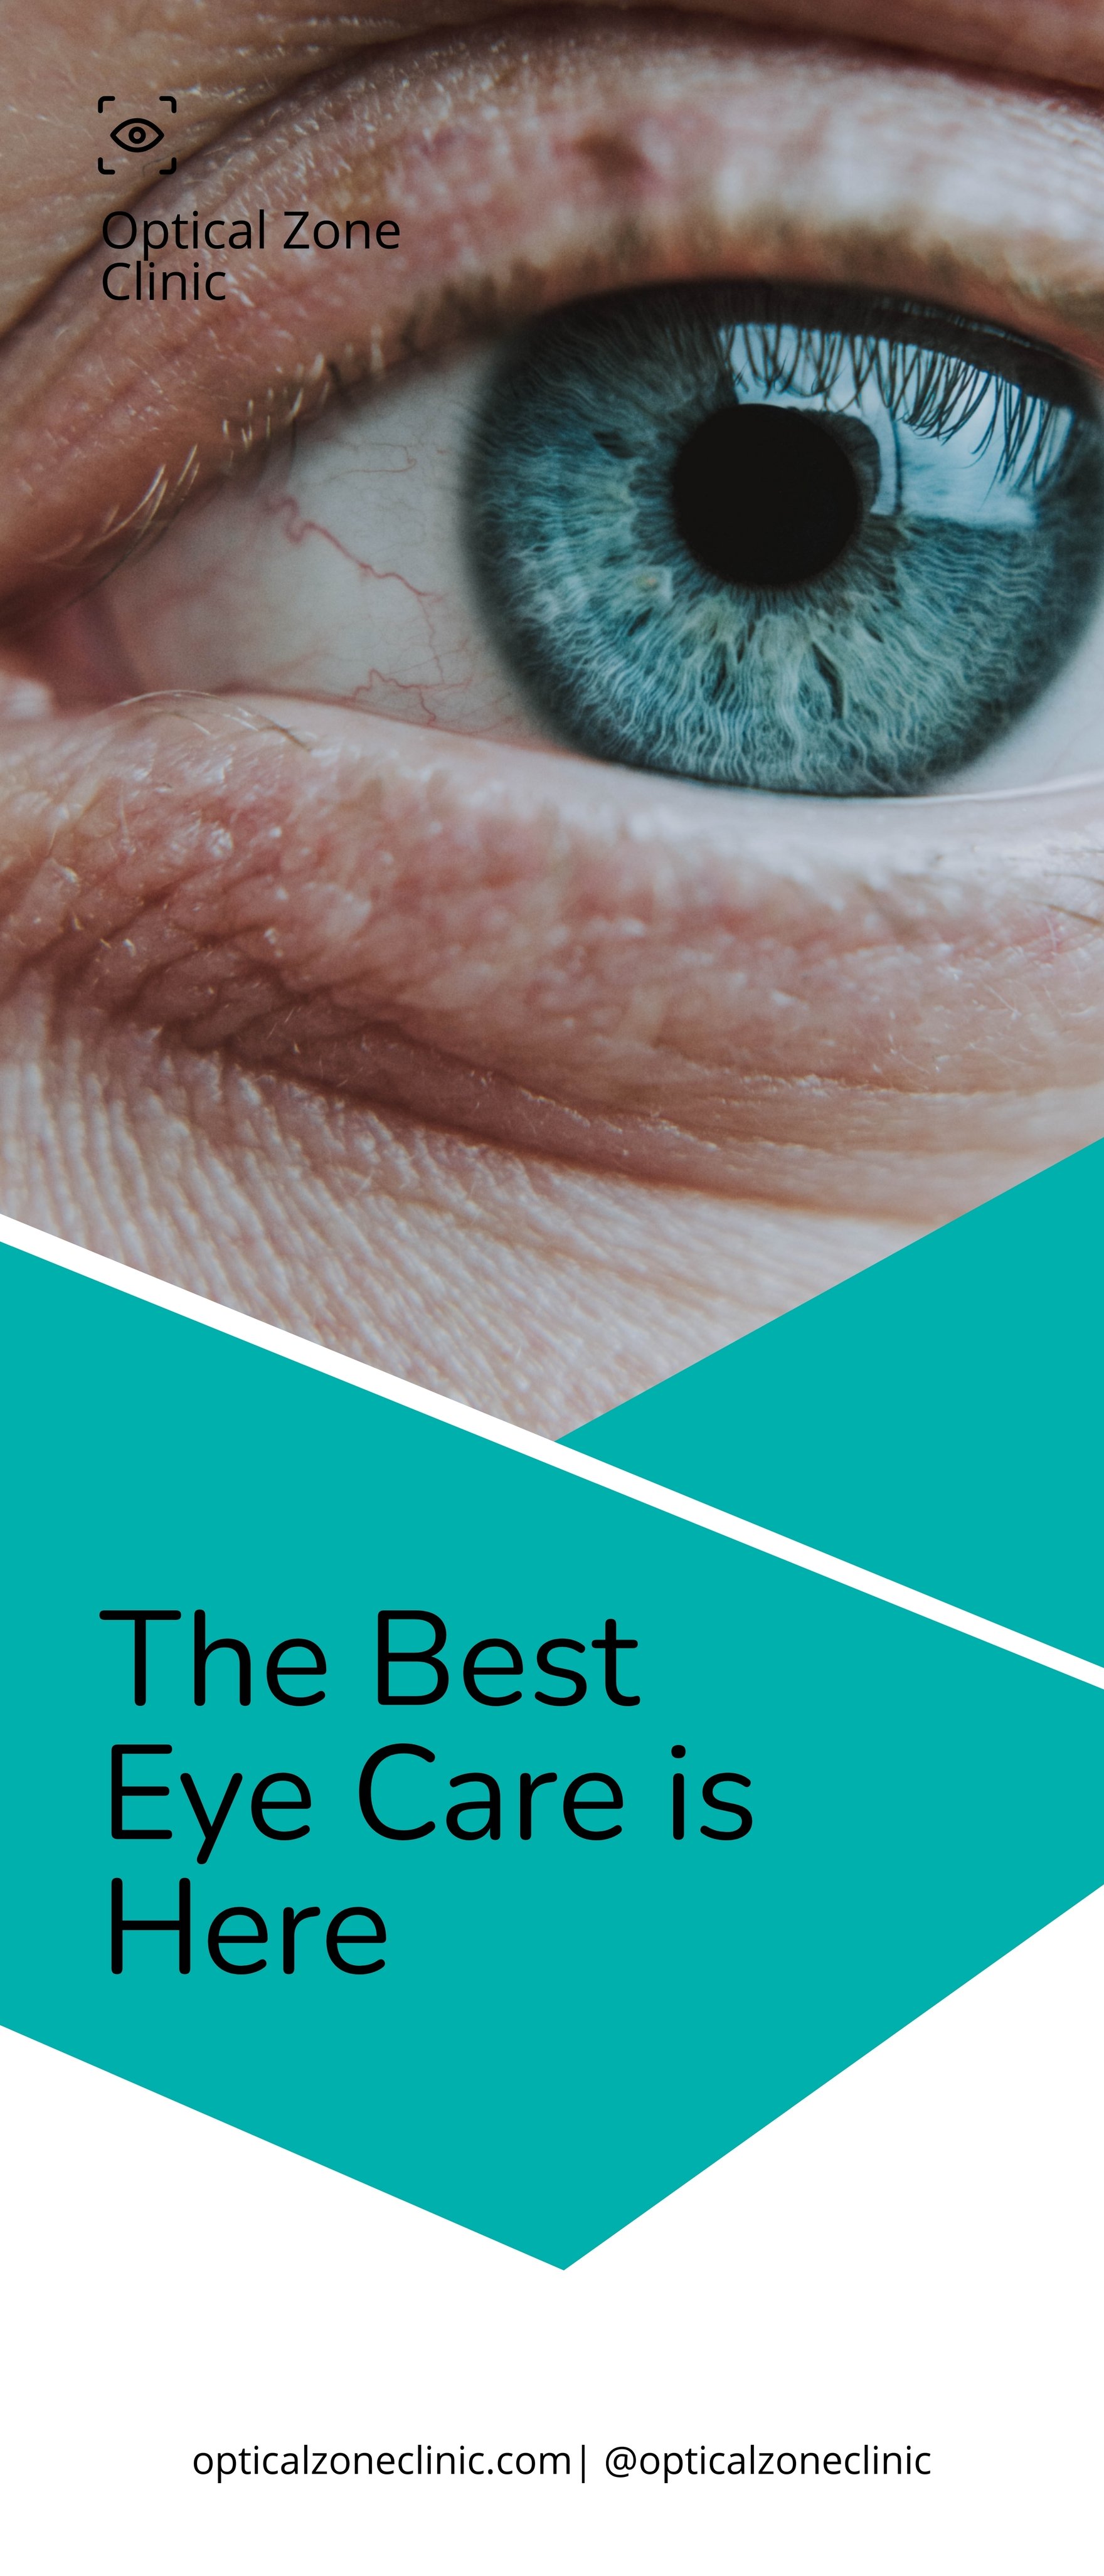 Eye Clinic Roll Up Banner Template in Word, Google Docs, Illustrator, PSD, Apple Pages, Publisher